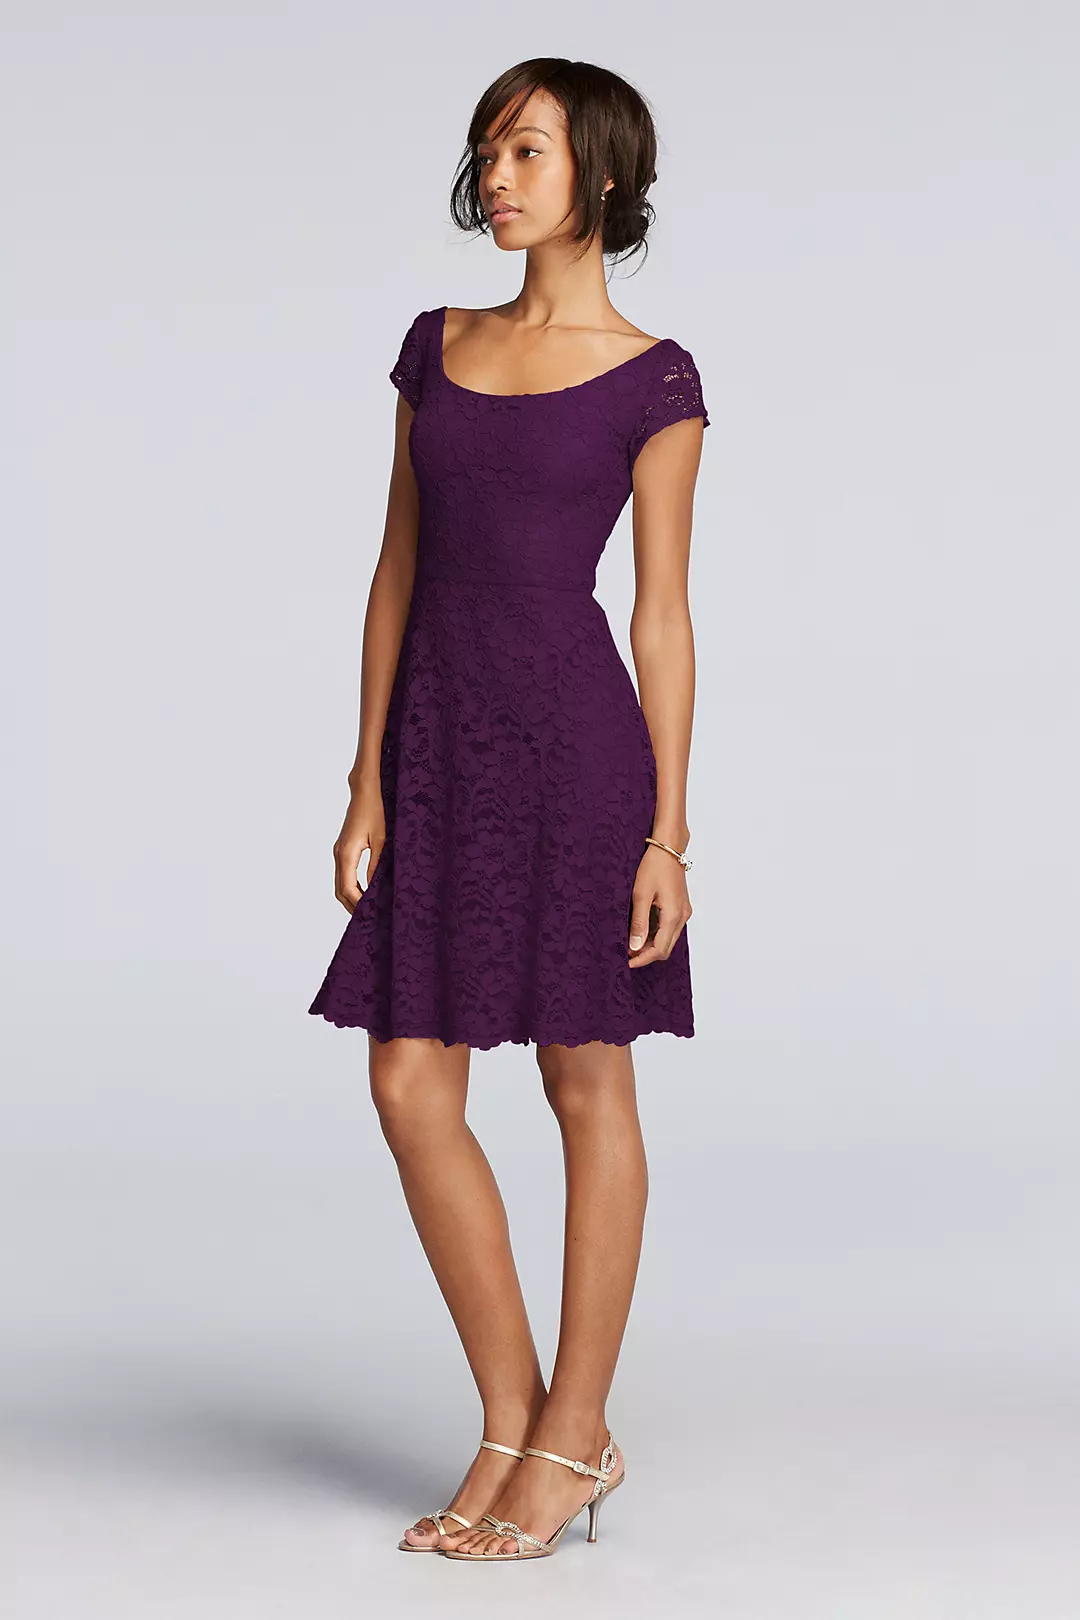 Short Lace Bridesmaid Dress with Cap Sleeves Image